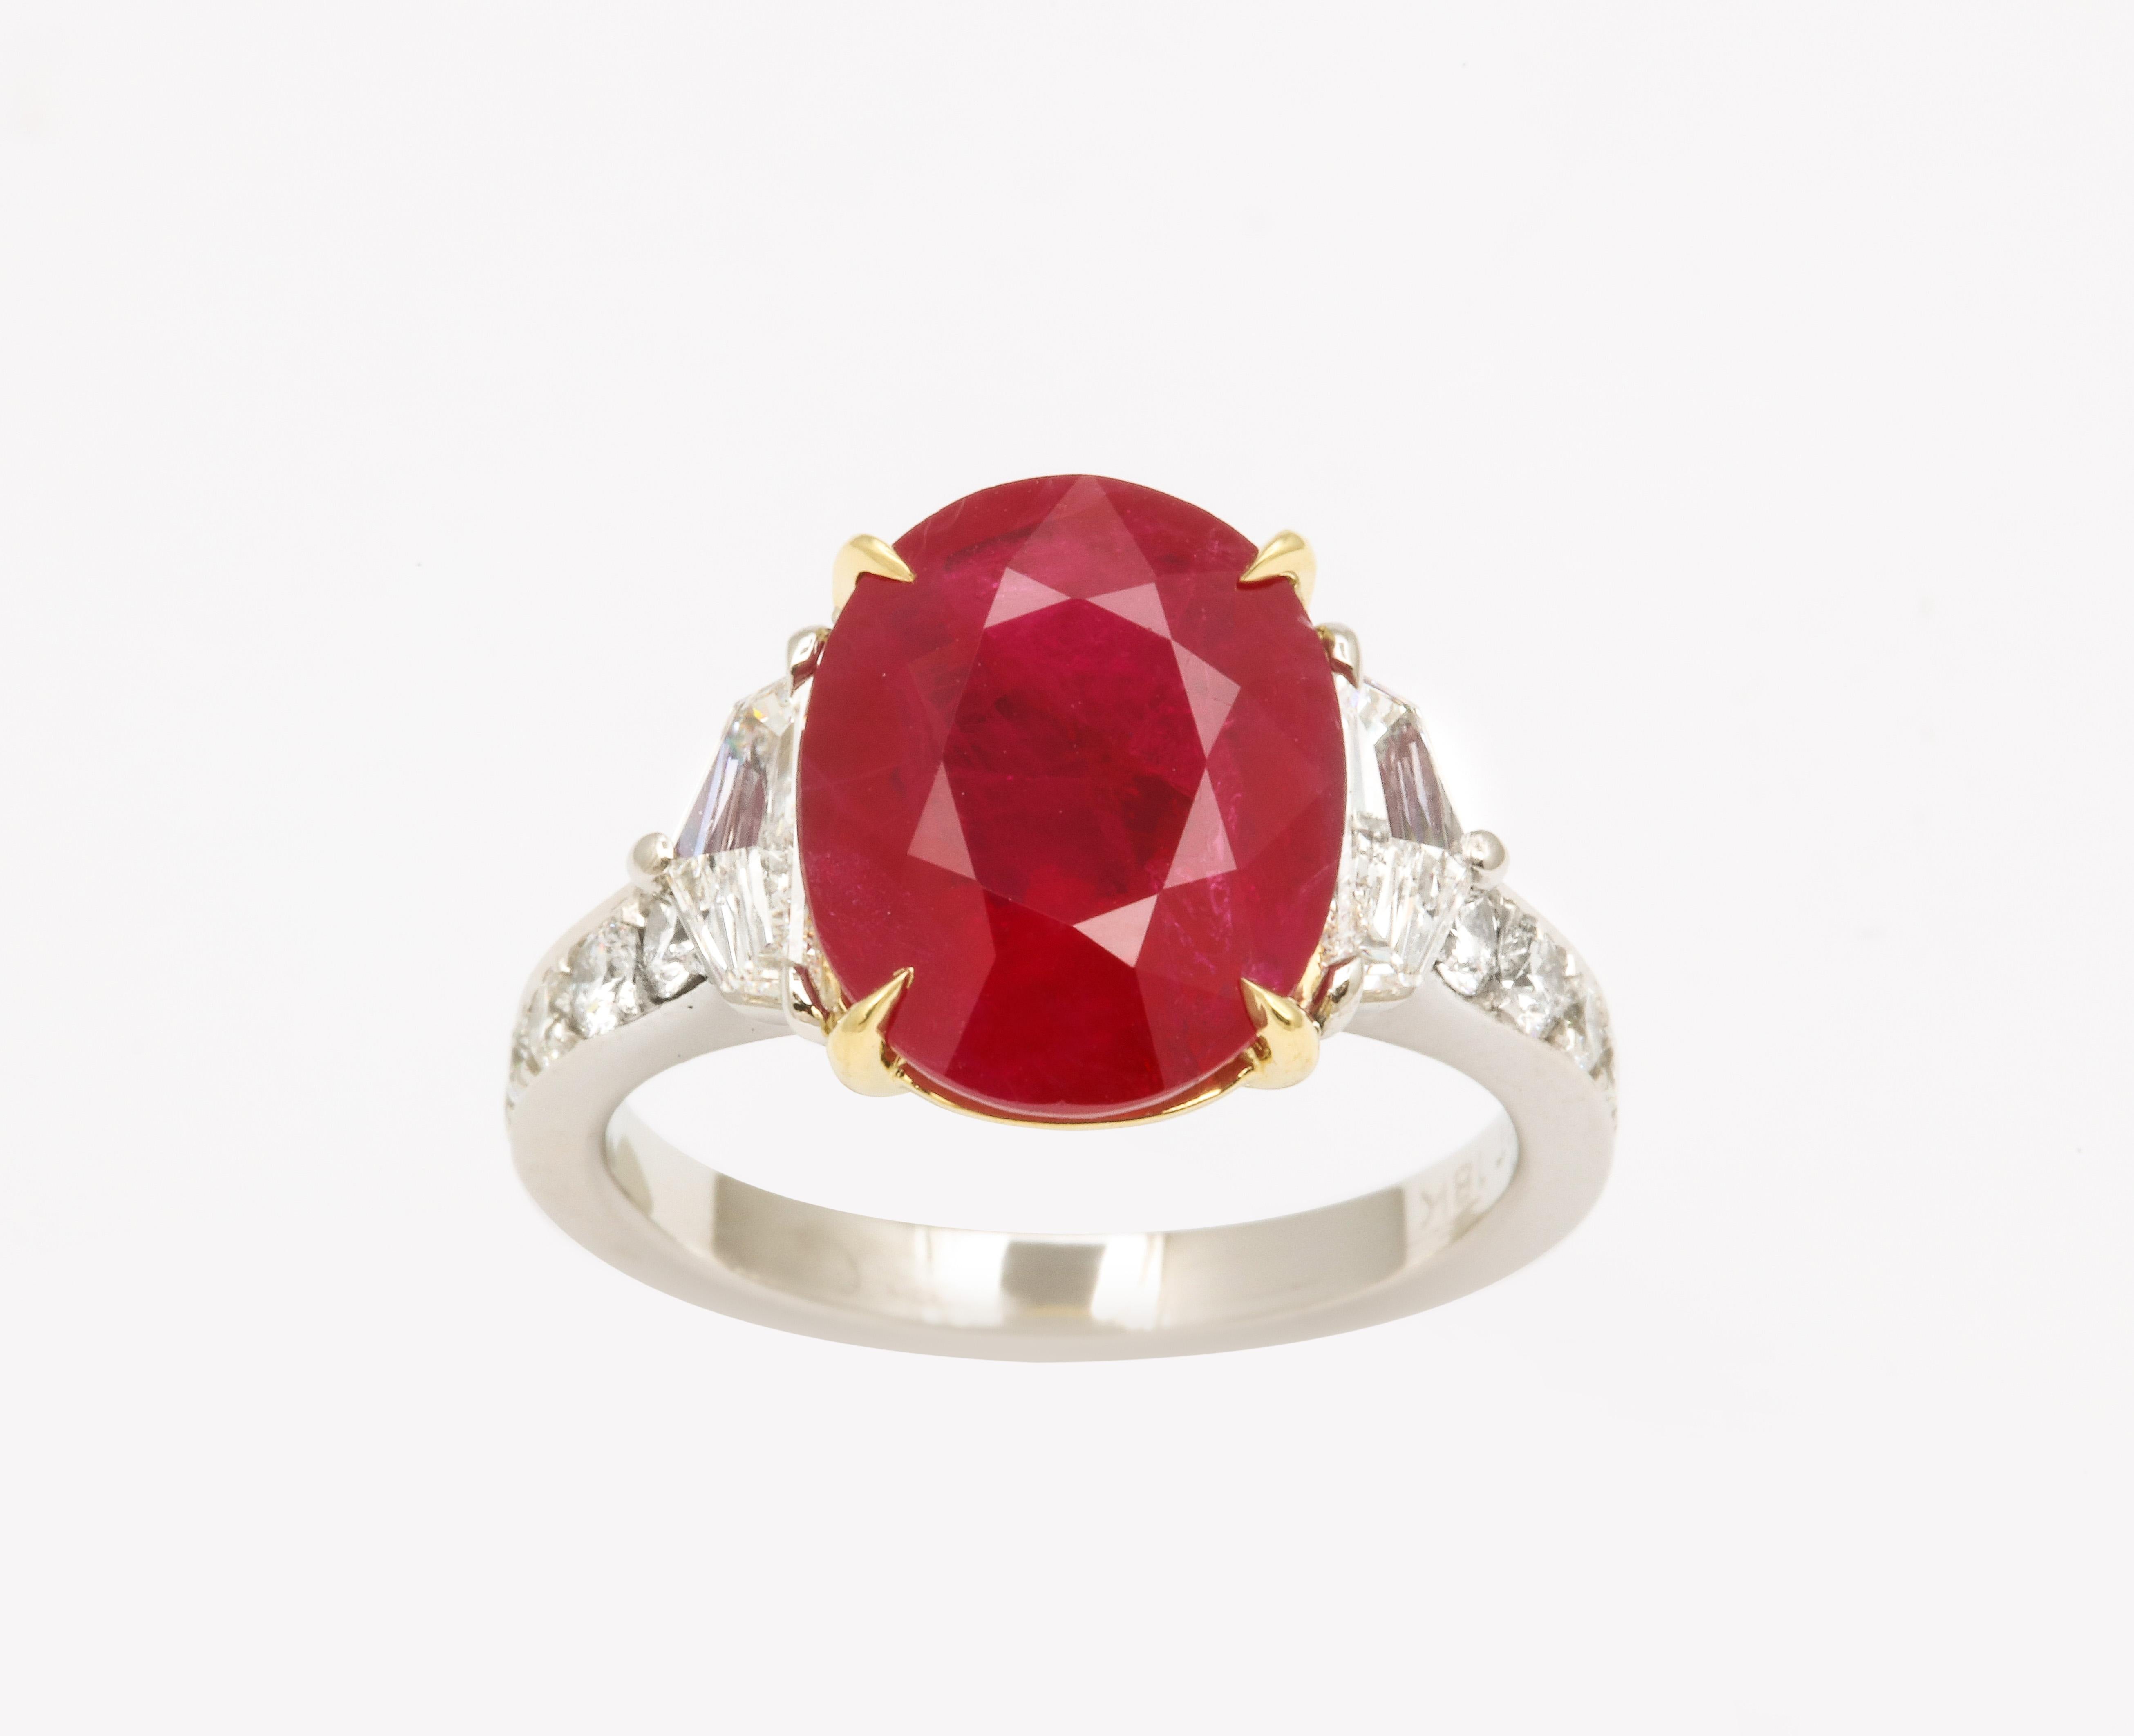 5 Carat Burma Ruby and Diamond Ring For Sale 3